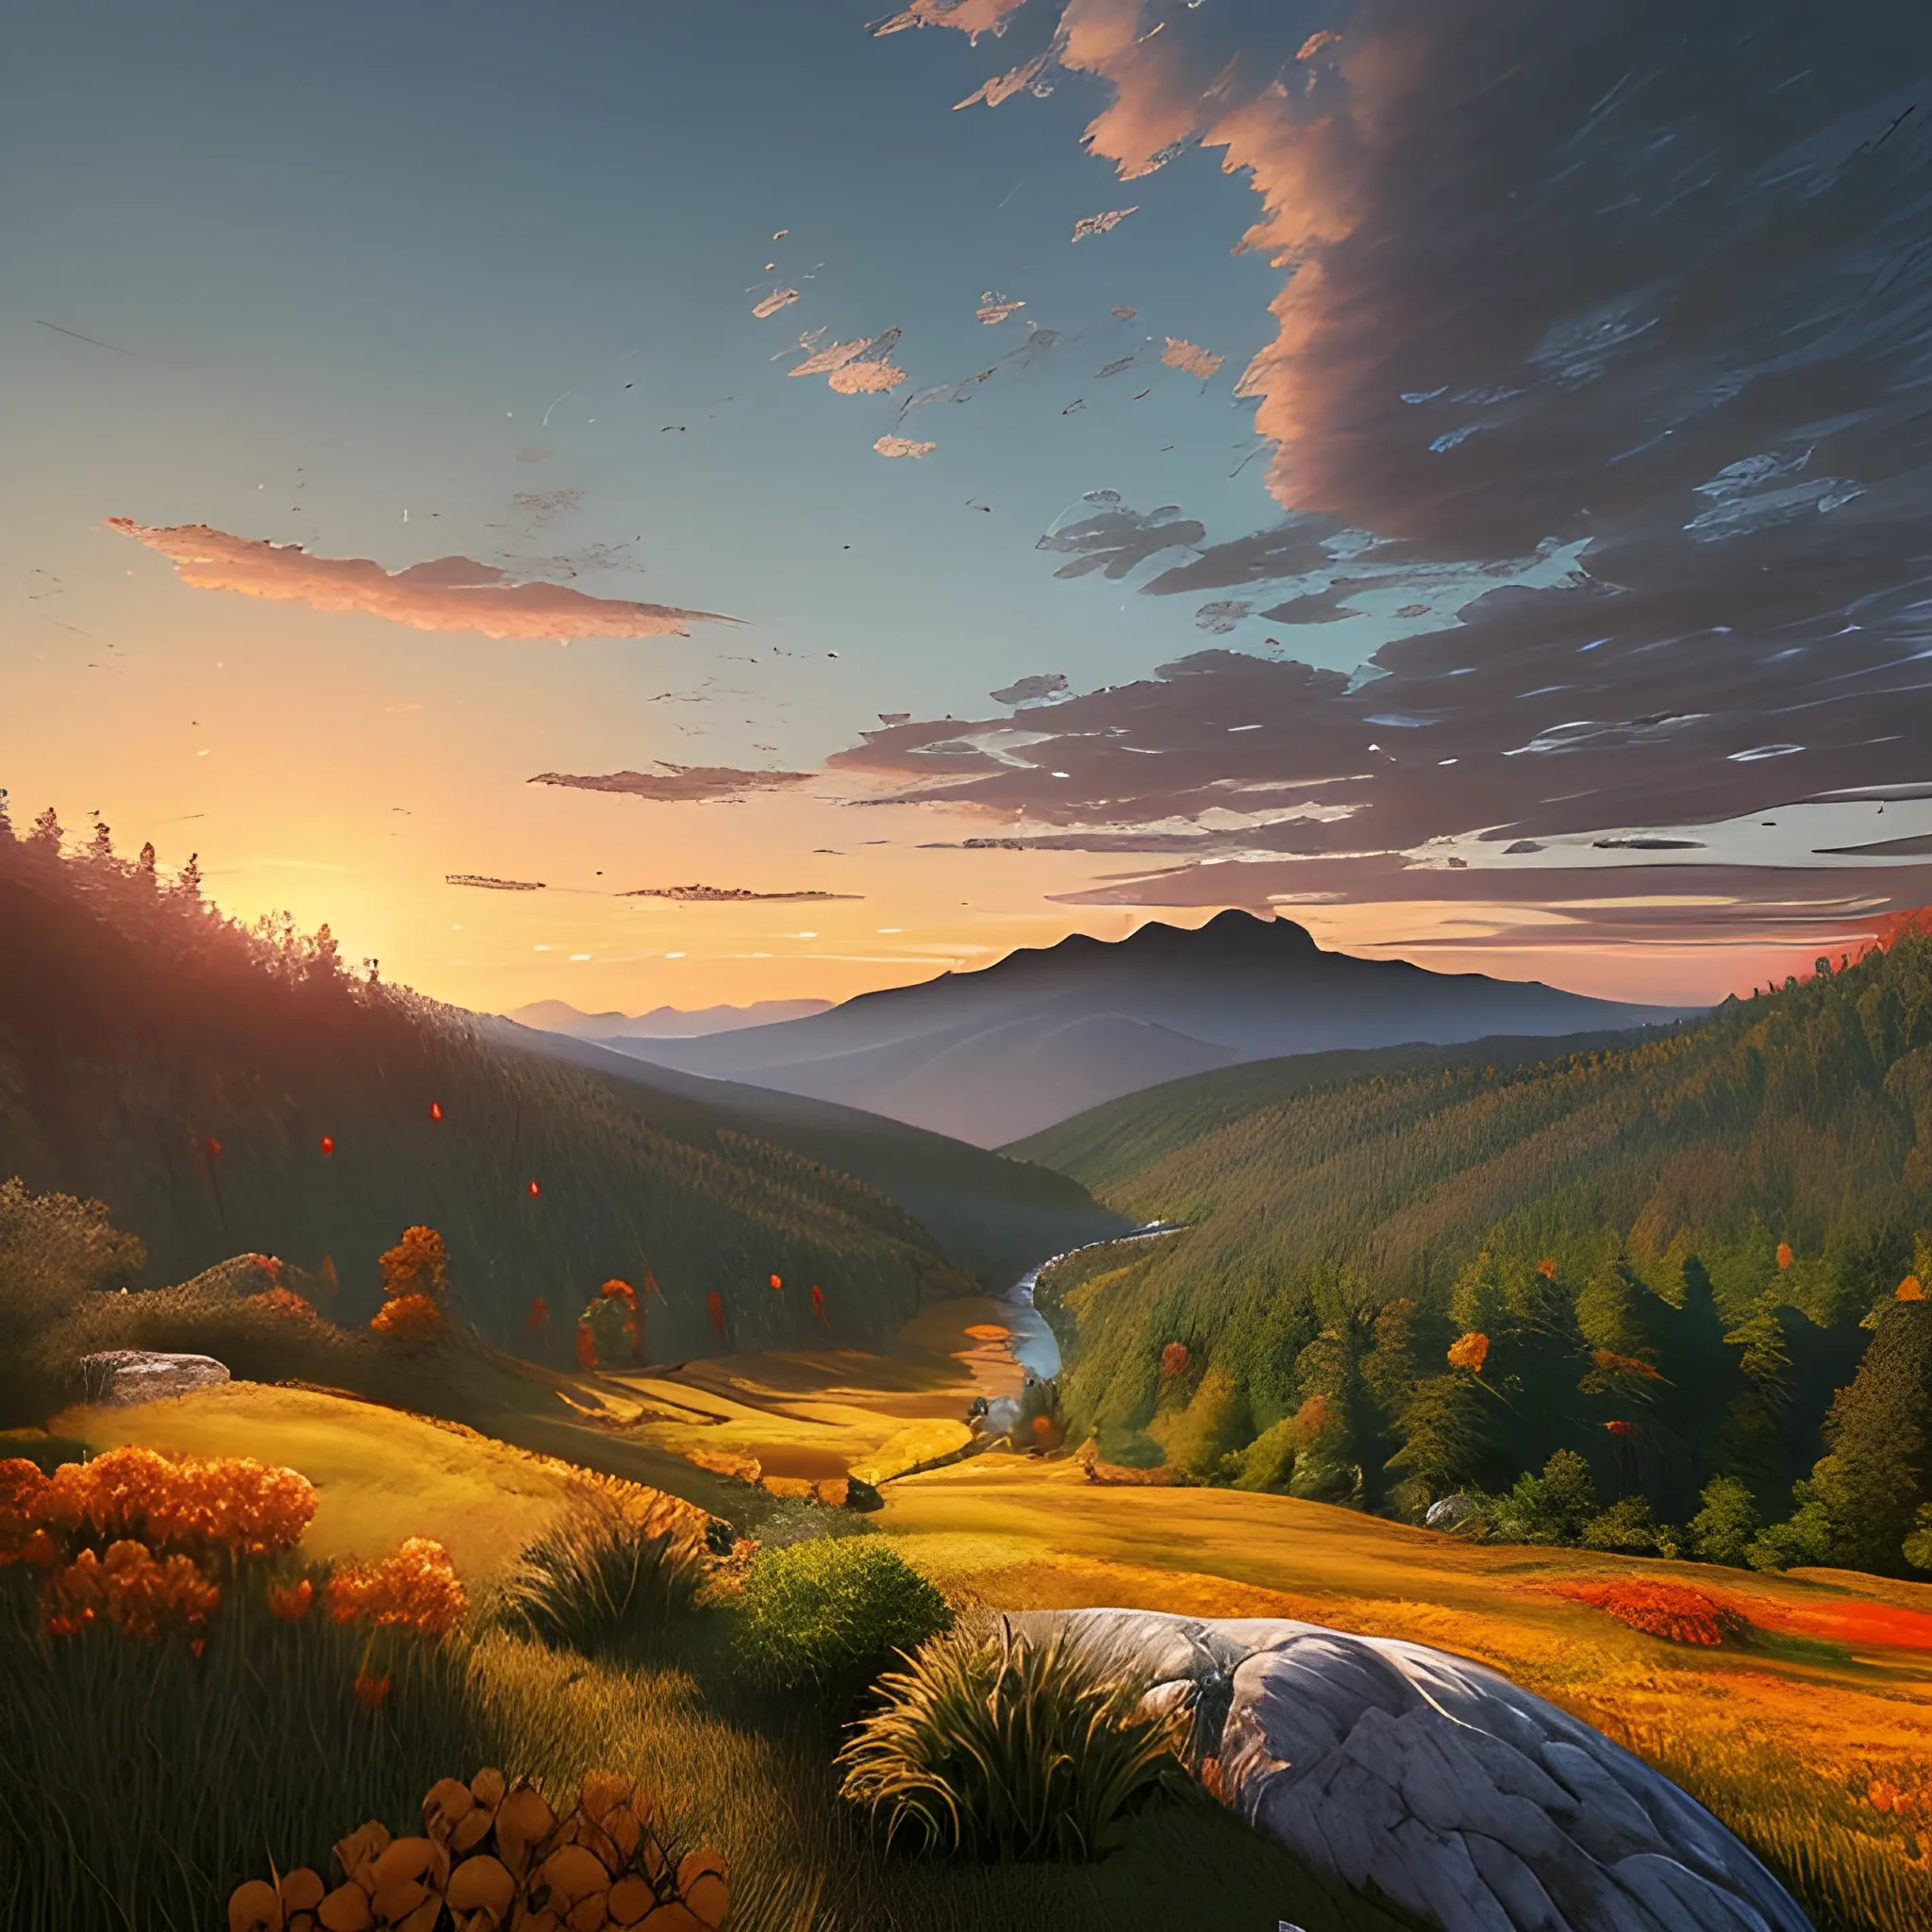 An awe-inspiring landscape showing a mountain range with dense forest in the foreground and rolling hills in the background. The overall vibe should be adventurous and wanderlust-evoking, with warm tones of oranges and yellows in the sky to convey a sunset or sunrise. A few birds soaring in the sky would add a touch of liveliness to the scene, and a human figure gazing at the view from an infinity pool on the foreground would help to emphasize the vastness of the landscape.
